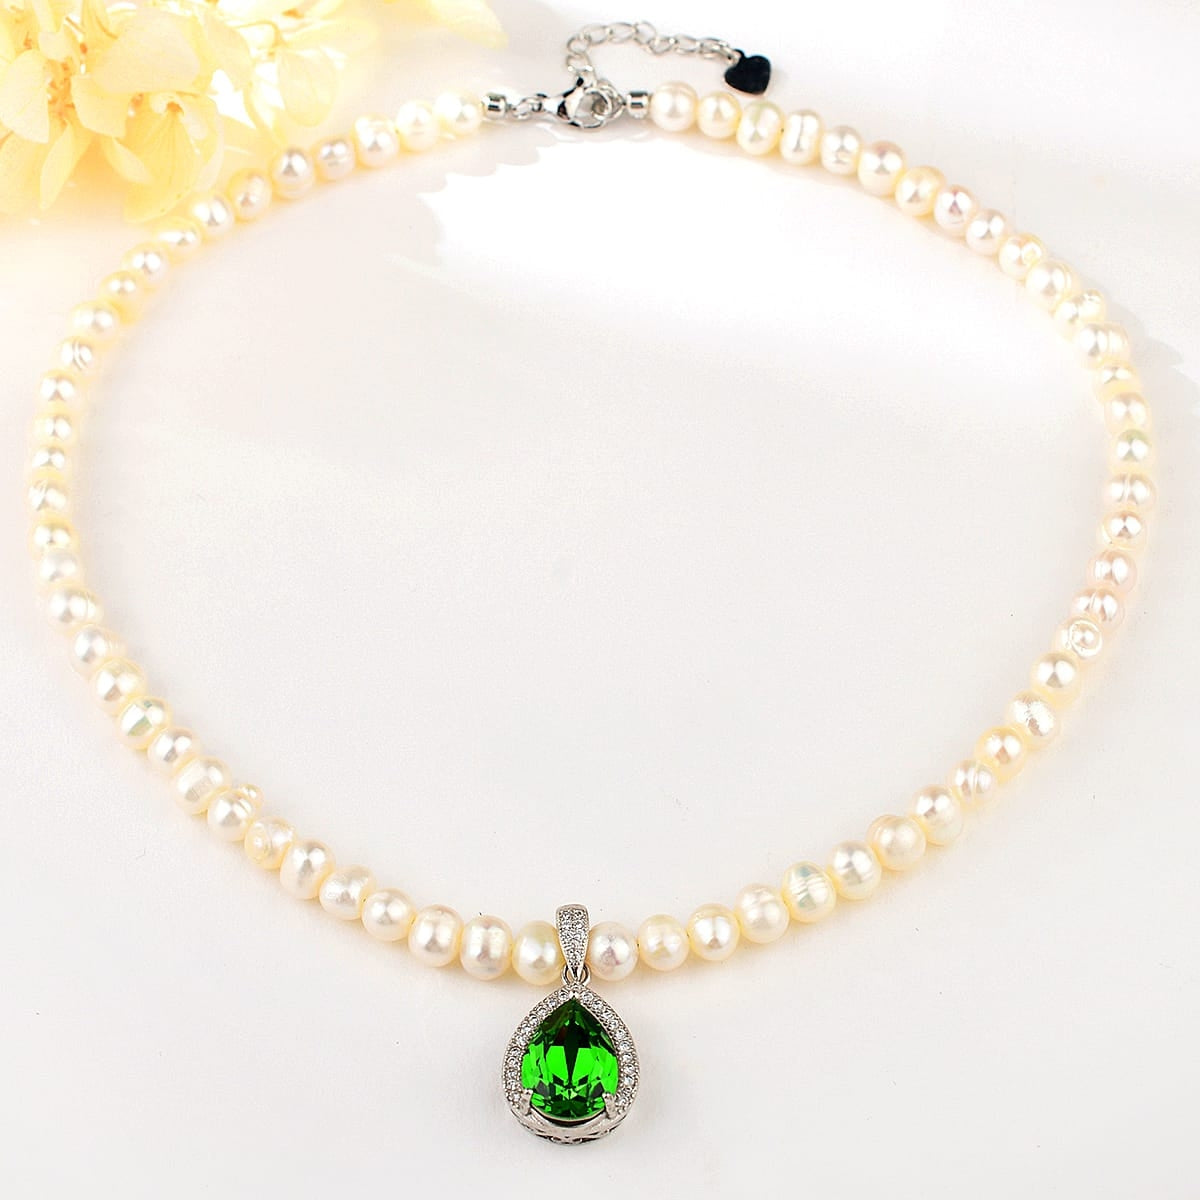 GREEN PENDANT NECKLACE